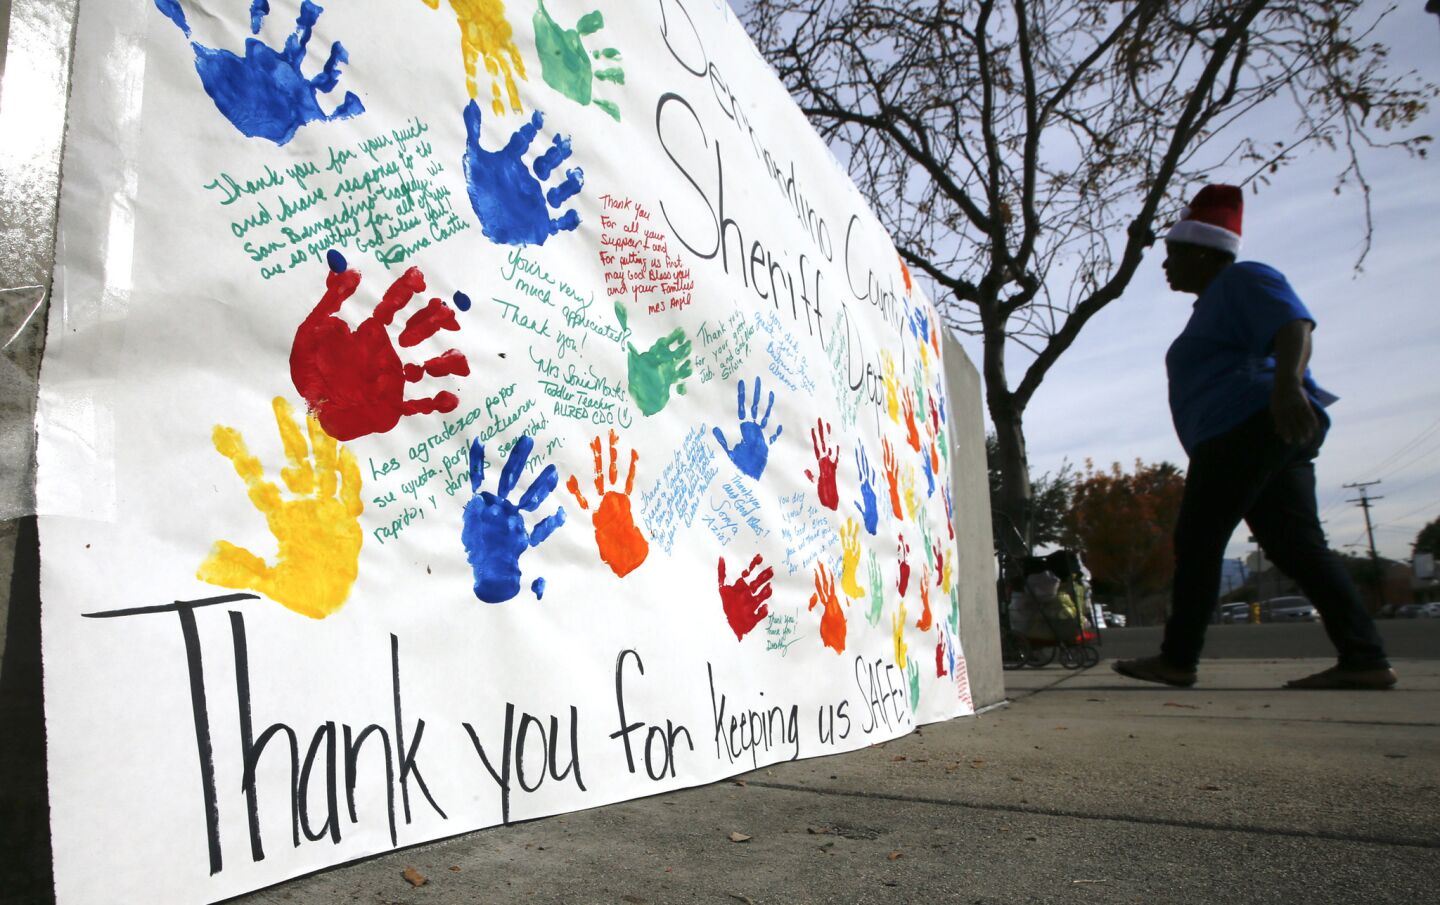 One week after the mass shooting at the Inland Regional Center in San Bernardino, the public is posting signs of gratitude and thanks like this one found at the San Bernardino Police Department.